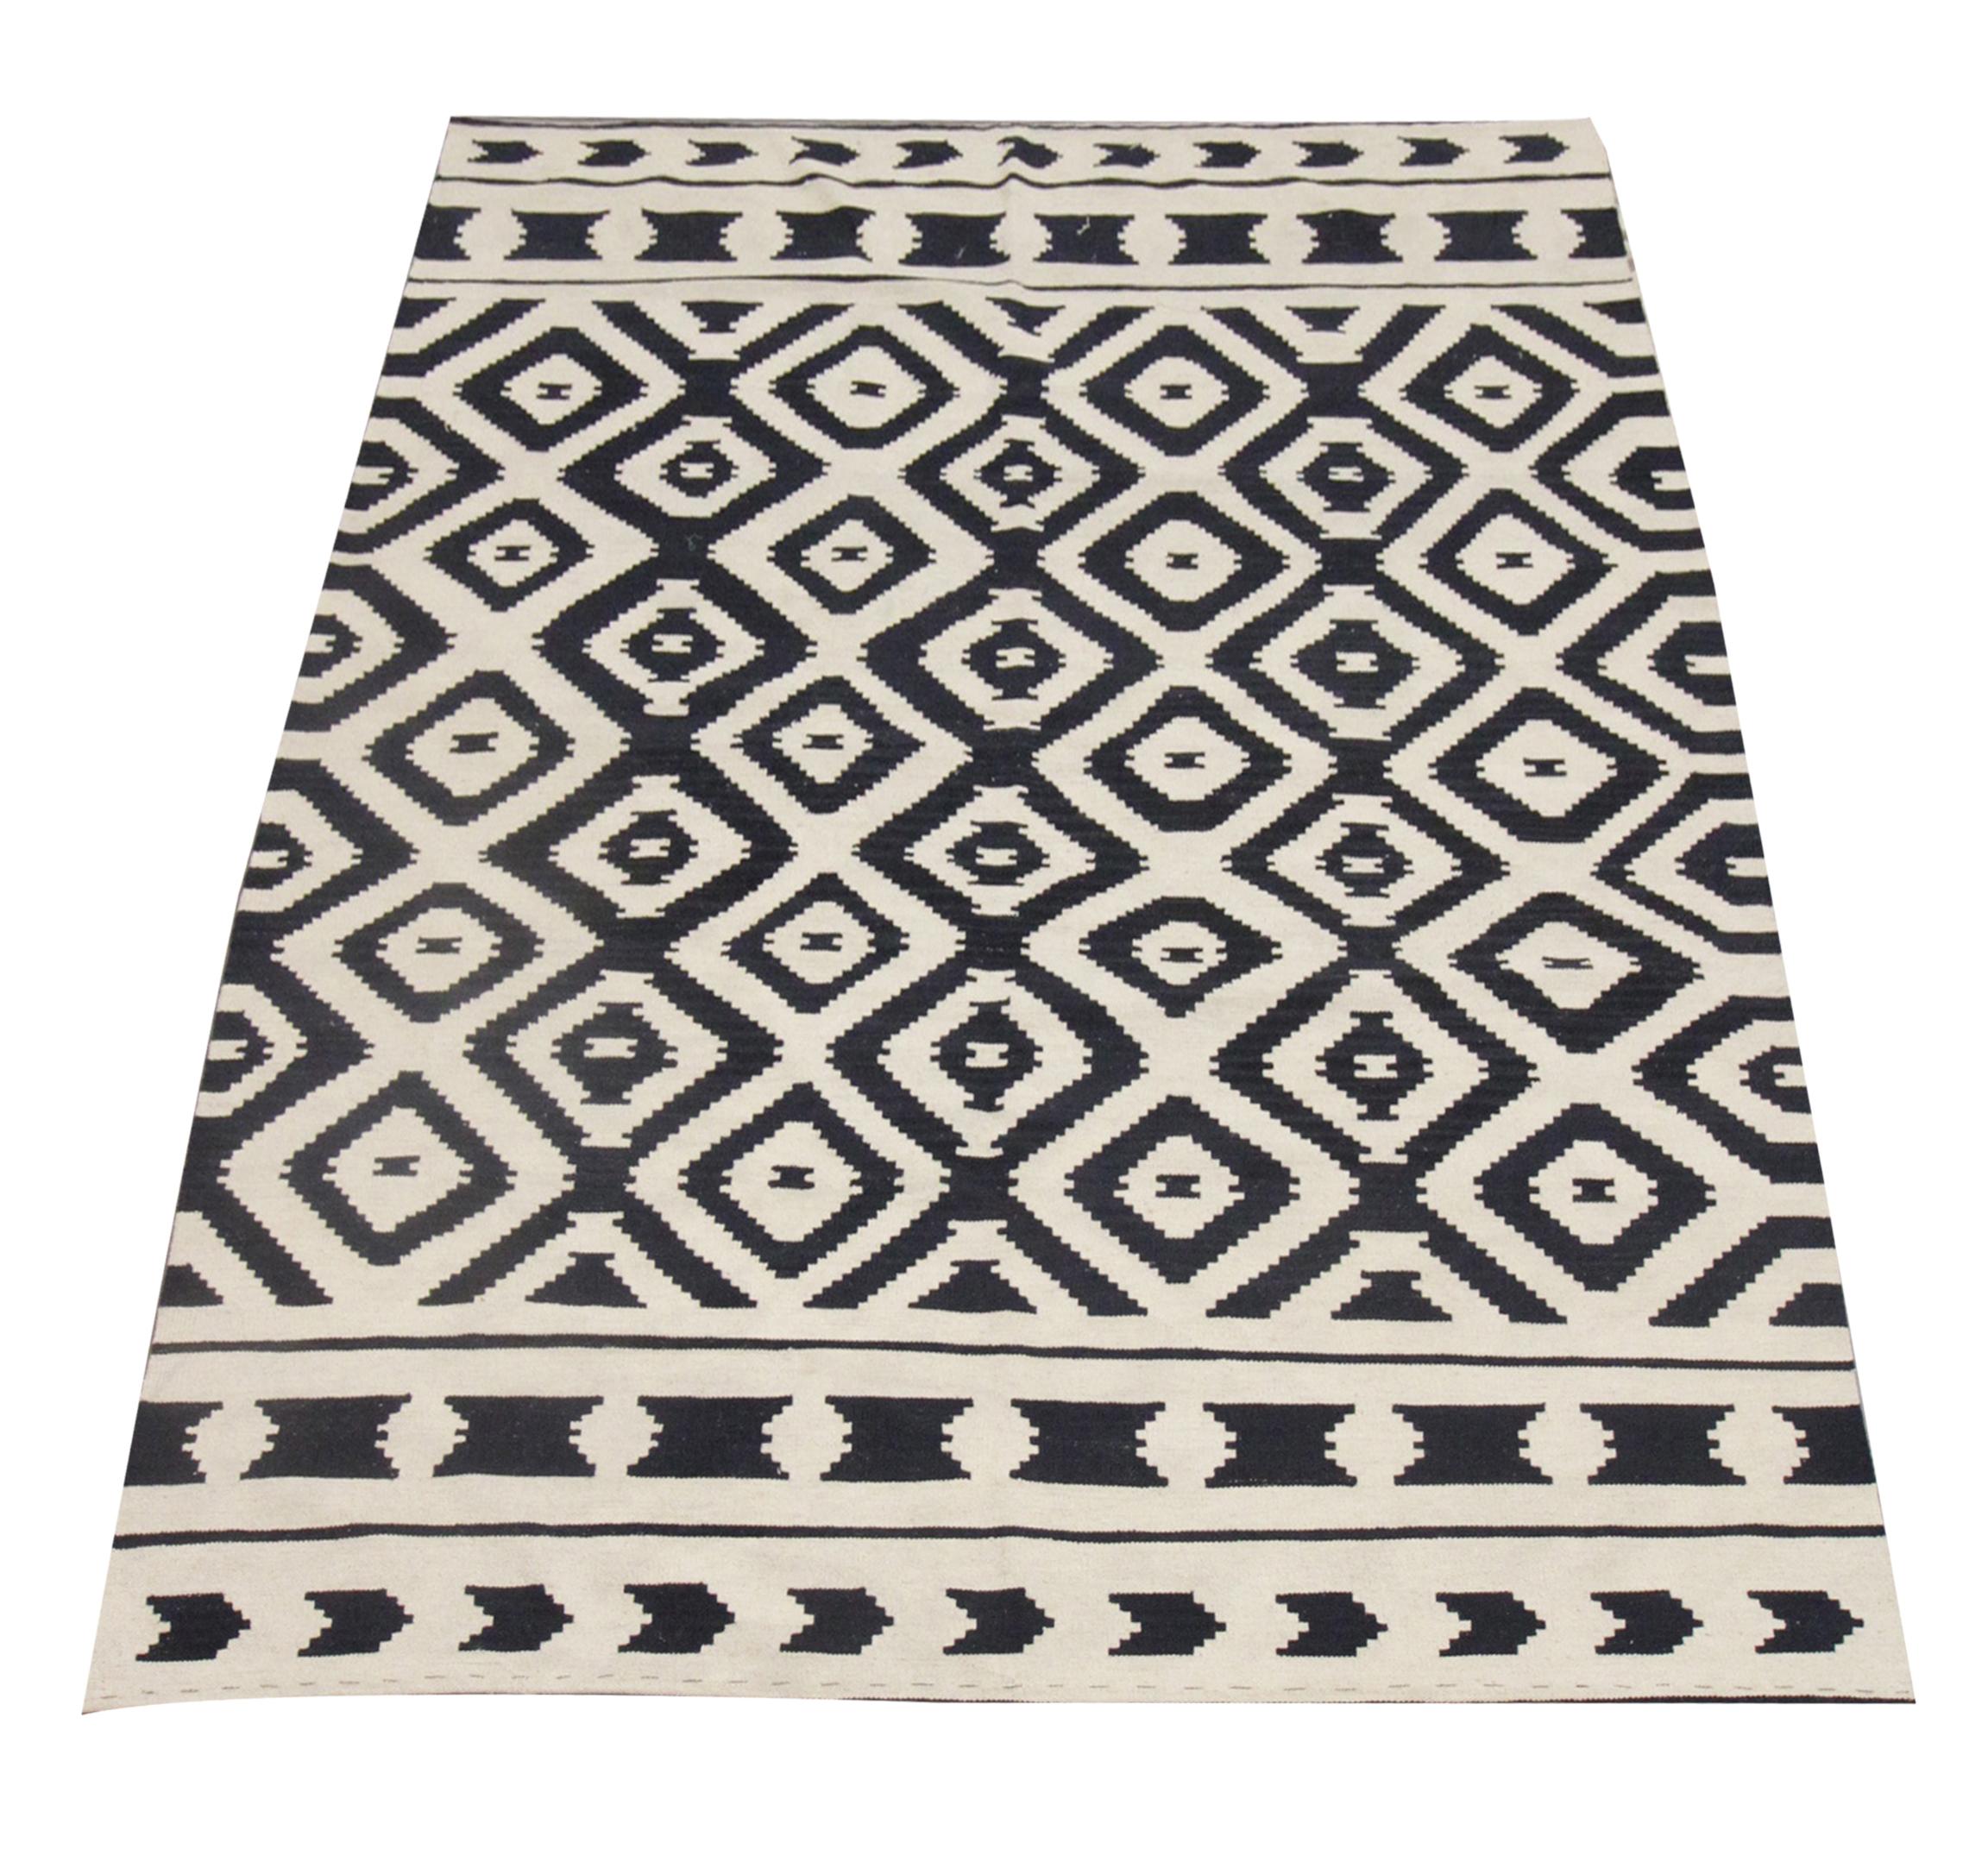 This modern wool rug is a handwoven Kilim constructed in Afghanistan in the early 2000s. The design has been woven with a simple Aztec, contrasting colour palette featuring black and cream. The design features a repeating geometric pattern with